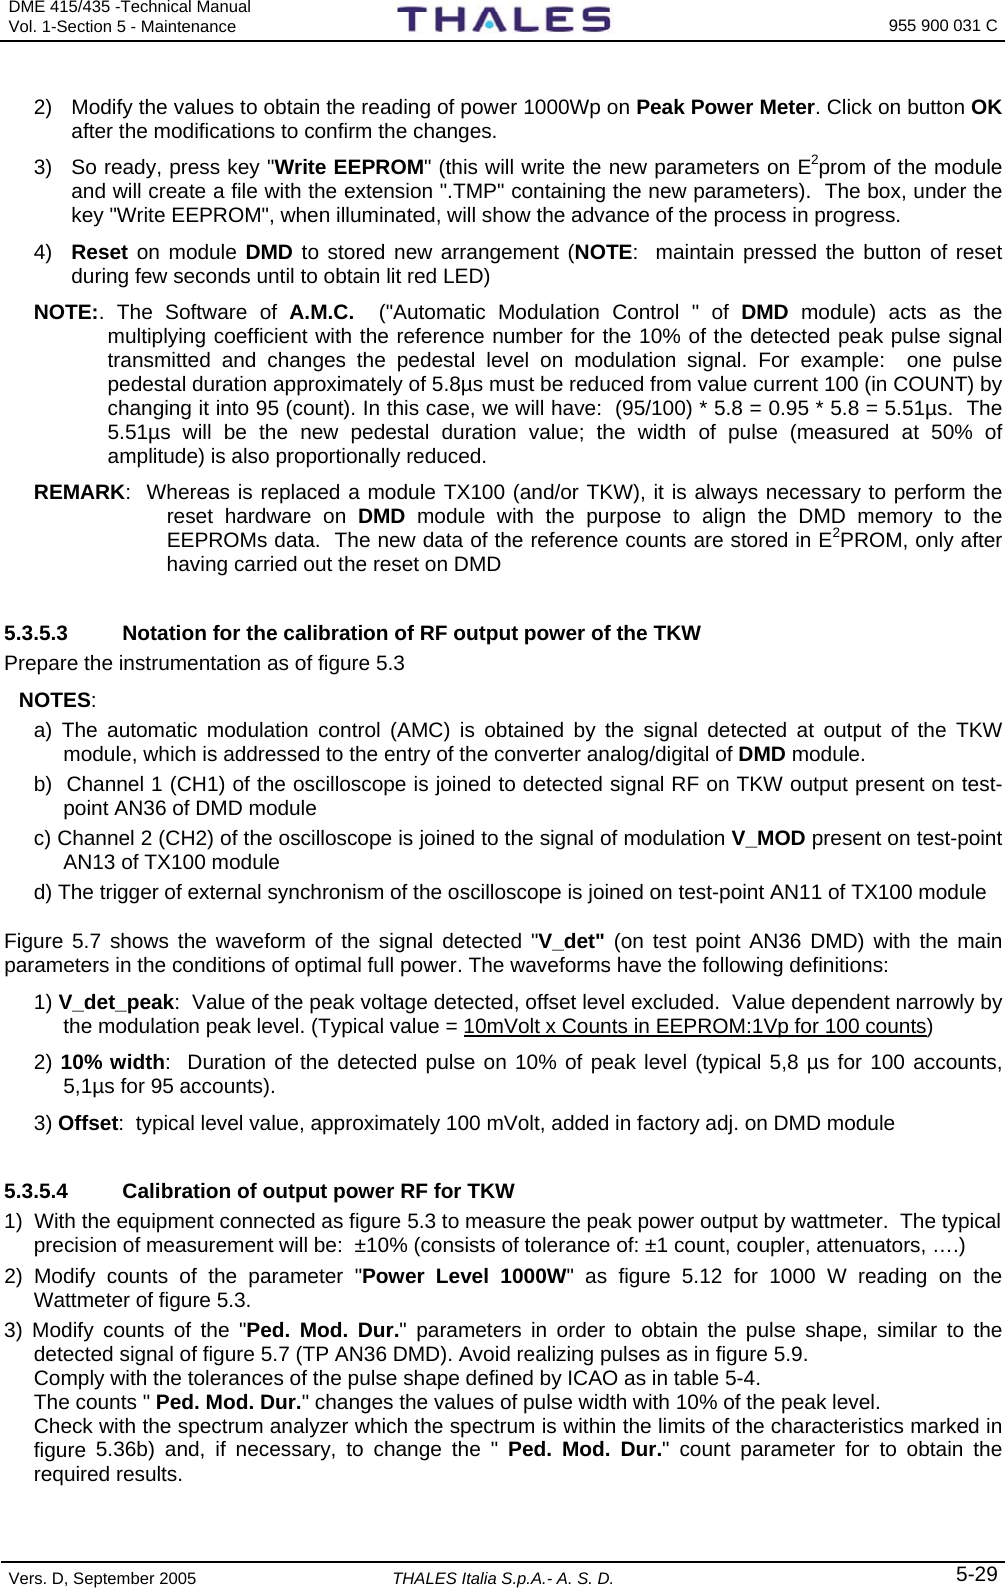 DME 415/435 -Technical Manual Vol. 1-Section 5 - Maintenance    955 900 031 C Vers. D, September 2005  THALES Italia S.p.A.- A. S. D. 5-29 2)  Modify the values to obtain the reading of power 1000Wp on Peak Power Meter. Click on button OK after the modifications to confirm the changes. 3)  So ready, press key &quot;Write EEPROM&quot; (this will write the new parameters on E2prom of the module and will create a file with the extension &quot;.TMP&quot; containing the new parameters).  The box, under the key &quot;Write EEPROM&quot;, when illuminated, will show the advance of the process in progress. 4)  Reset on module DMD to stored new arrangement (NOTE:  maintain pressed the button of reset during few seconds until to obtain lit red LED) NOTE:. The Software of A.M.C.  (&quot;Automatic Modulation Control &quot; of DMD module) acts as the multiplying coefficient with the reference number for the 10% of the detected peak pulse signal transmitted and changes the pedestal level on modulation signal. For example:  one pulse pedestal duration approximately of 5.8µs must be reduced from value current 100 (in COUNT) by changing it into 95 (count). In this case, we will have:  (95/100) * 5.8 = 0.95 * 5.8 = 5.51µs.  The 5.51µs will be the new pedestal duration value; the width of pulse (measured at 50% of amplitude) is also proportionally reduced.  REMARK:  Whereas is replaced a module TX100 (and/or TKW), it is always necessary to perform the reset hardware on DMD  module with the purpose to align the DMD memory to the EEPROMs data.  The new data of the reference counts are stored in E2PROM, only after having carried out the reset on DMD  5.3.5.3  Notation for the calibration of RF output power of the TKW Prepare the instrumentation as of figure 5.3  NOTES:   a) The automatic modulation control (AMC) is obtained by the signal detected at output of the TKW module, which is addressed to the entry of the converter analog/digital of DMD module.   b)  Channel 1 (CH1) of the oscilloscope is joined to detected signal RF on TKW output present on test-point AN36 of DMD module c) Channel 2 (CH2) of the oscilloscope is joined to the signal of modulation V_MOD present on test-point AN13 of TX100 module d) The trigger of external synchronism of the oscilloscope is joined on test-point AN11 of TX100 module Figure 5.7 shows the waveform of the signal detected &quot;V_det&quot; (on test point AN36 DMD) with the main parameters in the conditions of optimal full power. The waveforms have the following definitions:   1) V_det_peak:  Value of the peak voltage detected, offset level excluded.  Value dependent narrowly by the modulation peak level. (Typical value = 10mVolt x Counts in EEPROM:1Vp for 100 counts) 2) 10% width:  Duration of the detected pulse on 10% of peak level (typical 5,8 µs for 100 accounts, 5,1µs for 95 accounts).   3) Offset:  typical level value, approximately 100 mVolt, added in factory adj. on DMD module  5.3.5.4  Calibration of output power RF for TKW 1)  With the equipment connected as figure 5.3 to measure the peak power output by wattmeter.  The typical precision of measurement will be:  ±10% (consists of tolerance of: ±1 count, coupler, attenuators, ….) 2) Modify counts of the parameter &quot;Power Level 1000W&quot; as figure 5.12 for 1000 W reading on the Wattmeter of figure 5.3.  3) Modify counts of the &quot;Ped. Mod. Dur.&quot; parameters in order to obtain the pulse shape, similar to the detected signal of figure 5.7 (TP AN36 DMD). Avoid realizing pulses as in figure 5.9.  Comply with the tolerances of the pulse shape defined by ICAO as in table 5-4.   The counts &quot; Ped. Mod. Dur.&quot; changes the values of pulse width with 10% of the peak level.   Check with the spectrum analyzer which the spectrum is within the limits of the characteristics marked in figure  5.36b) and, if necessary, to change the &quot; Ped. Mod. Dur.&quot; count parameter for to obtain the required results. 